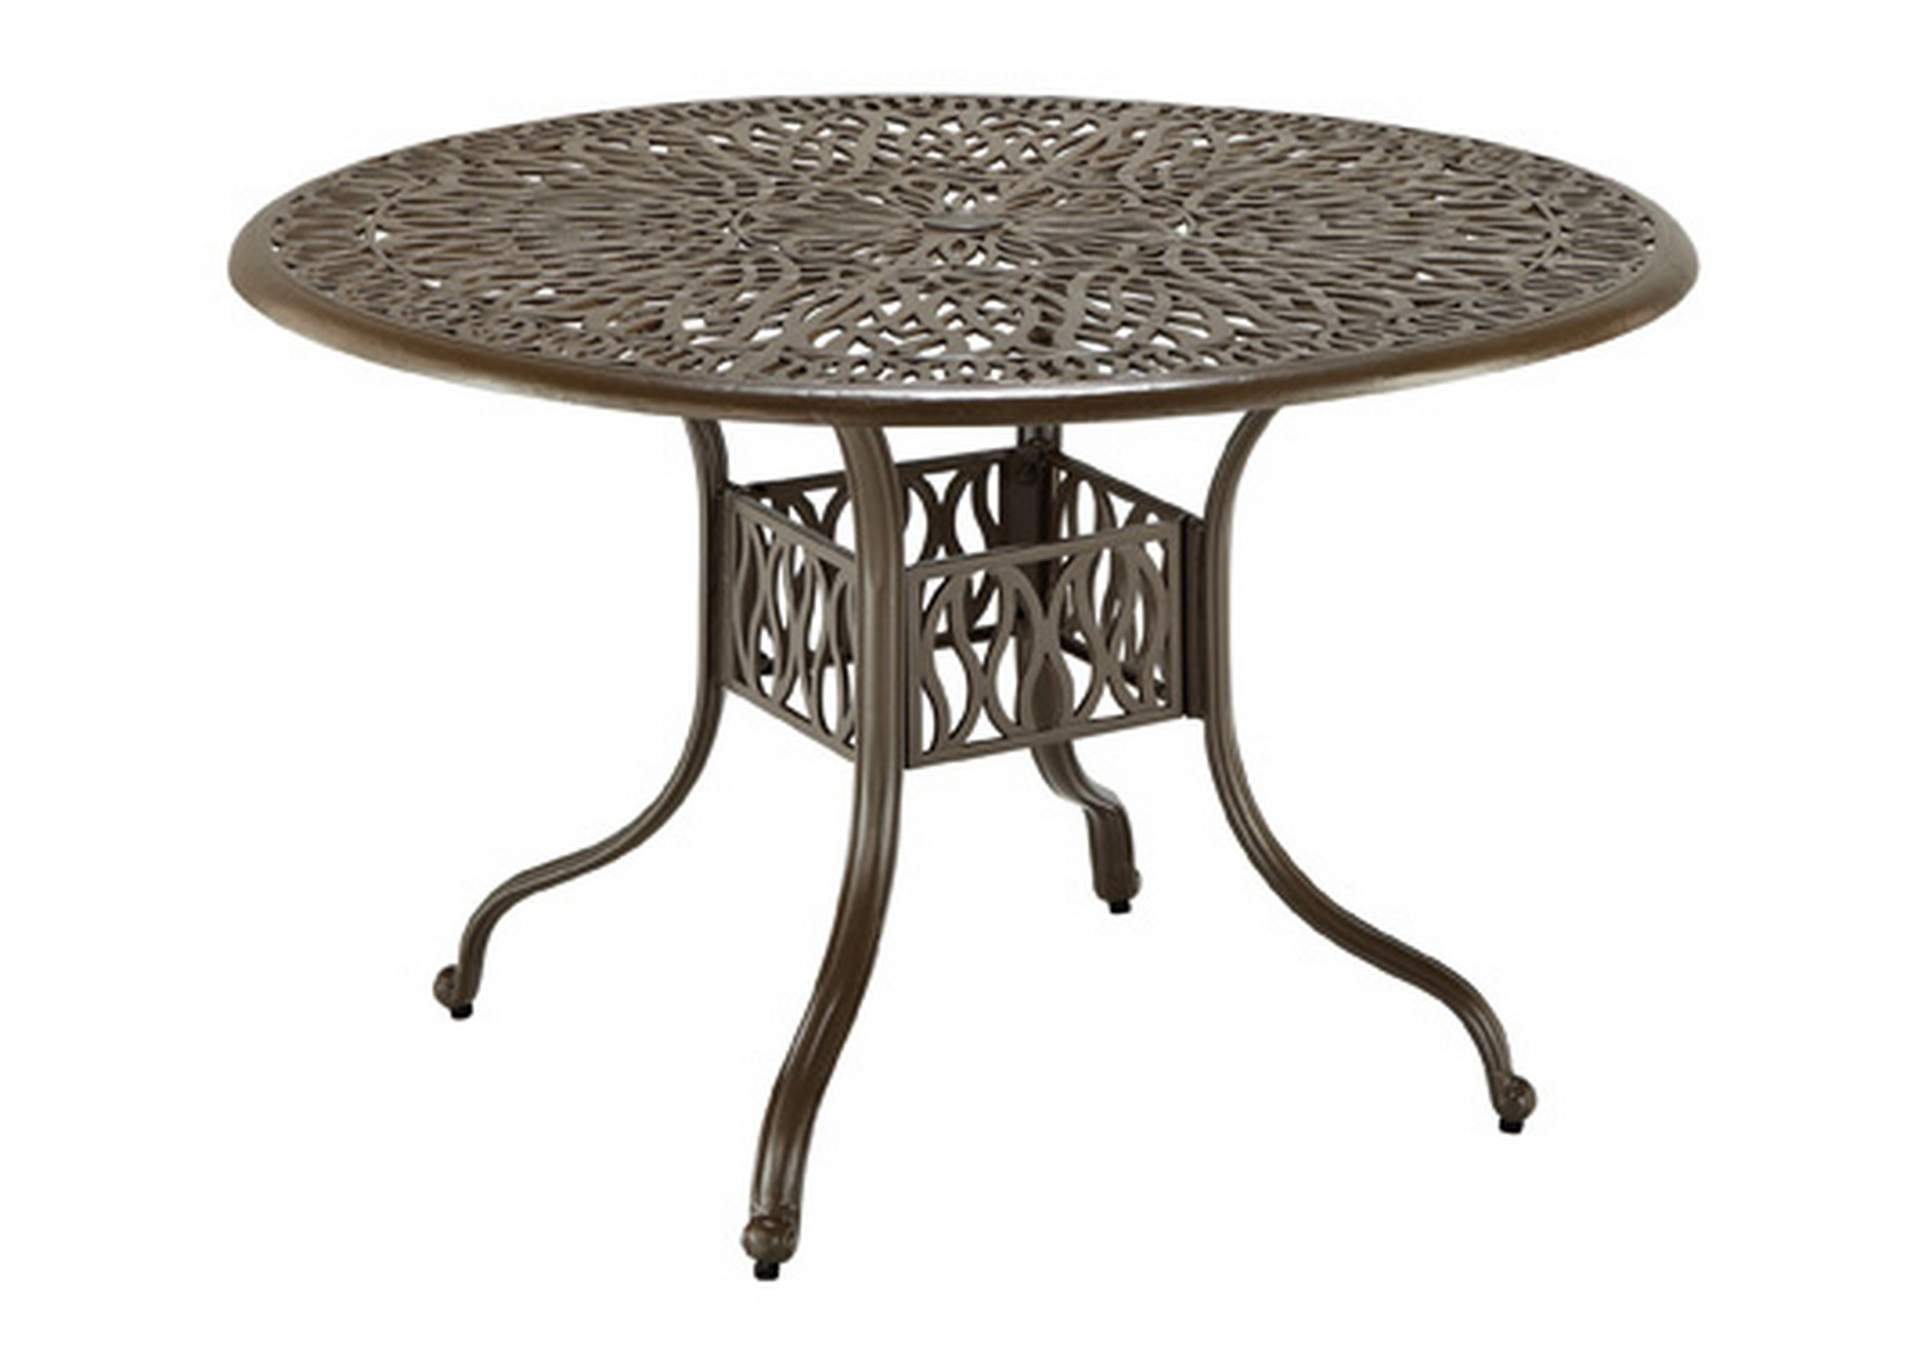 Capri Outdoor Dining Table By Homestyles,Homestyles